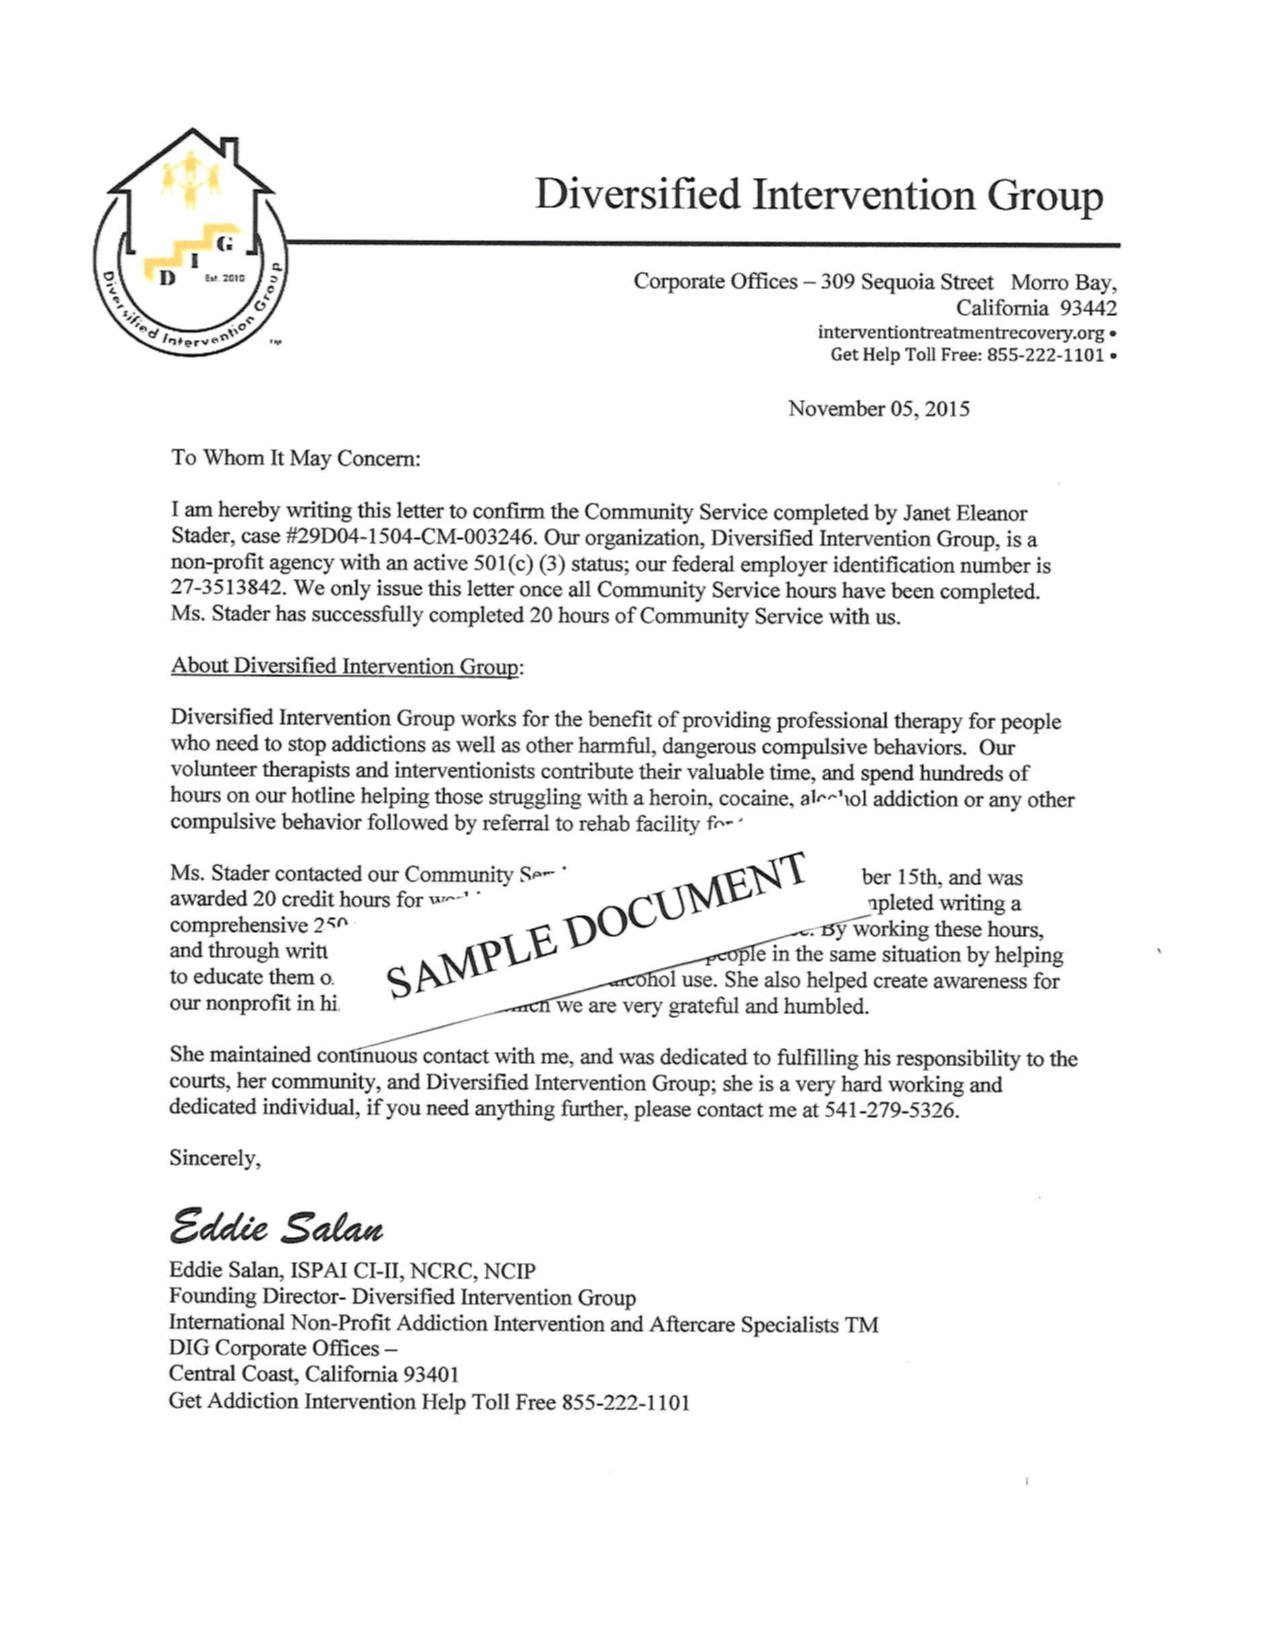 Court ordered Community Service Letter Template - How to Write An Intervention Letter Gallery Letter format formal